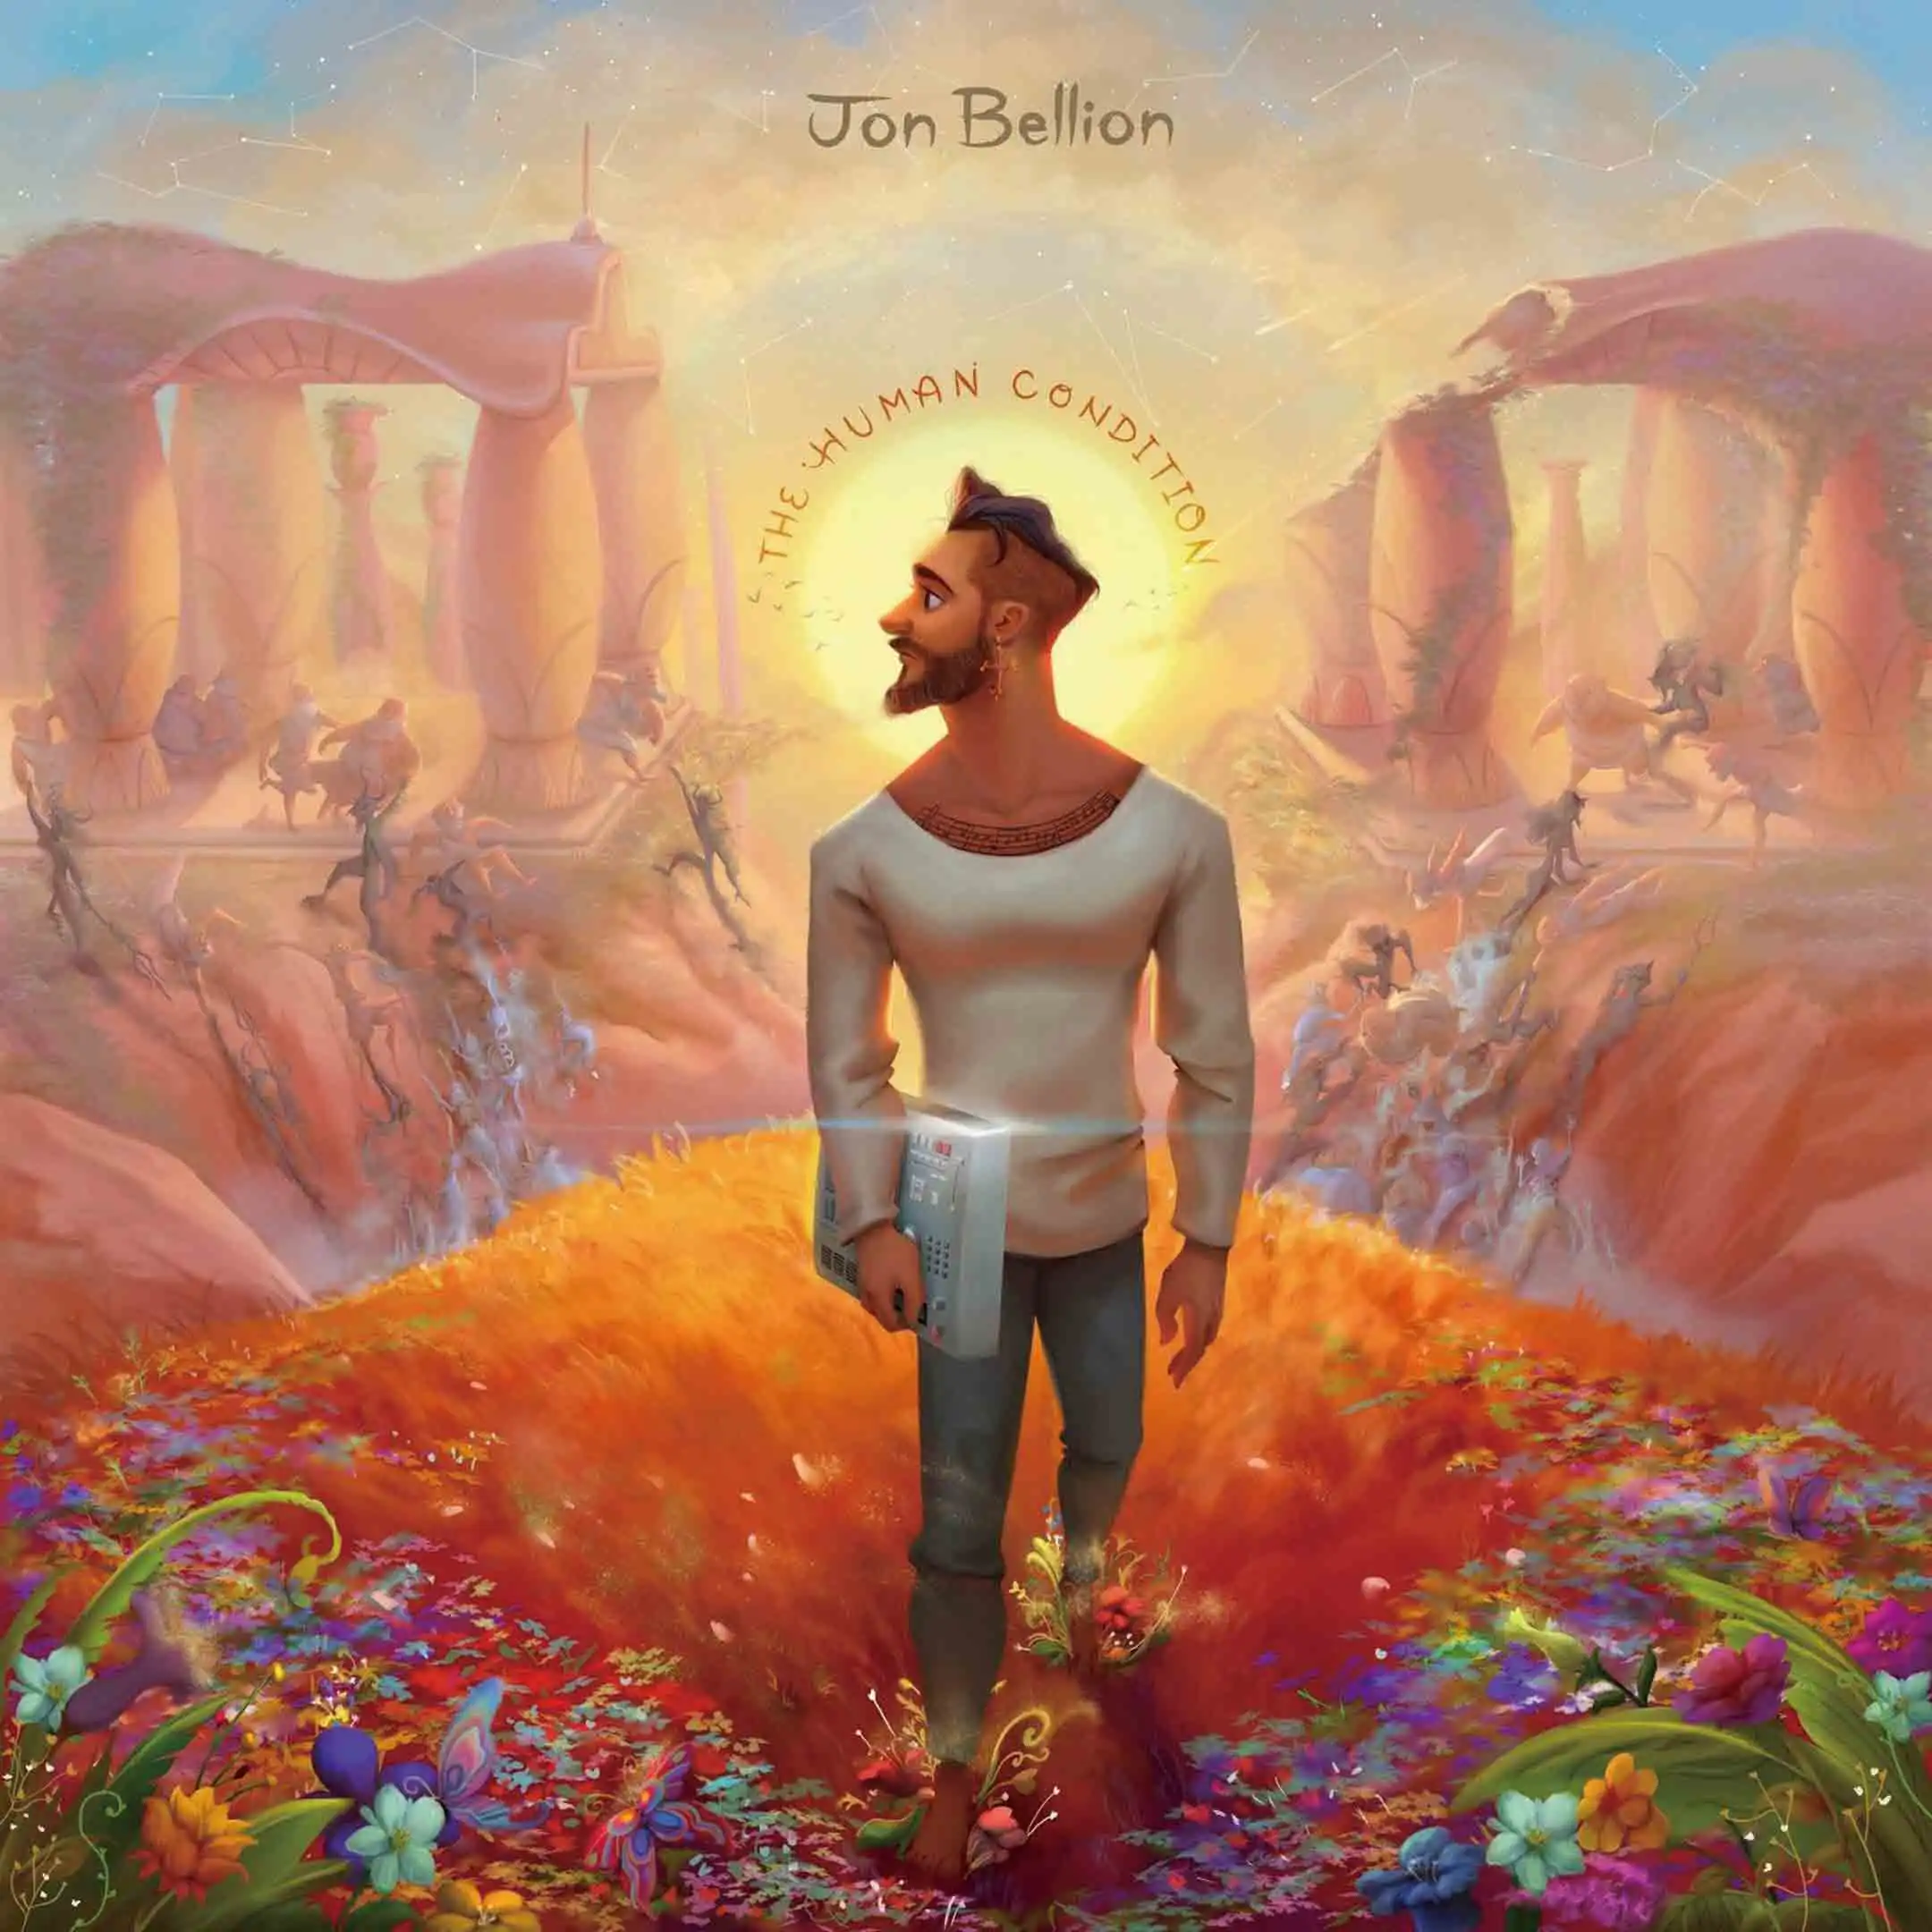 M295 The Human Condition Jon Bellion Wall Hot Poster Print Decoration Canvas Room Decor 24x24 20x20 | Дом и сад